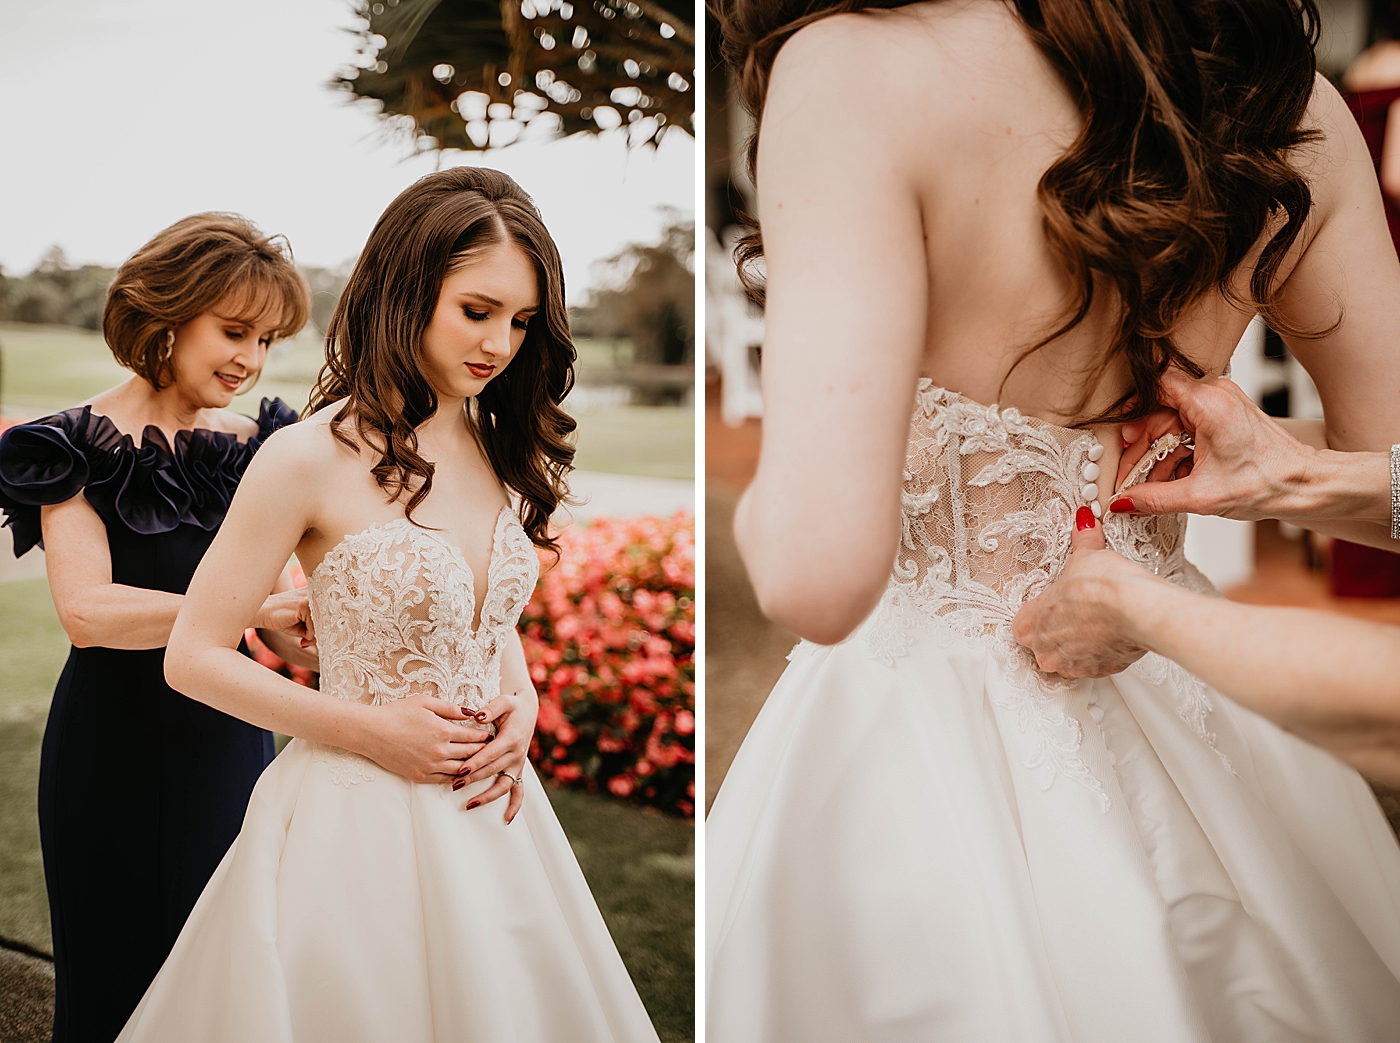 Mother helping Bride put Wedding dress on Breakers West Wedding Photography captured by South Florida Wedding Photographer Krystal Capone Photography 